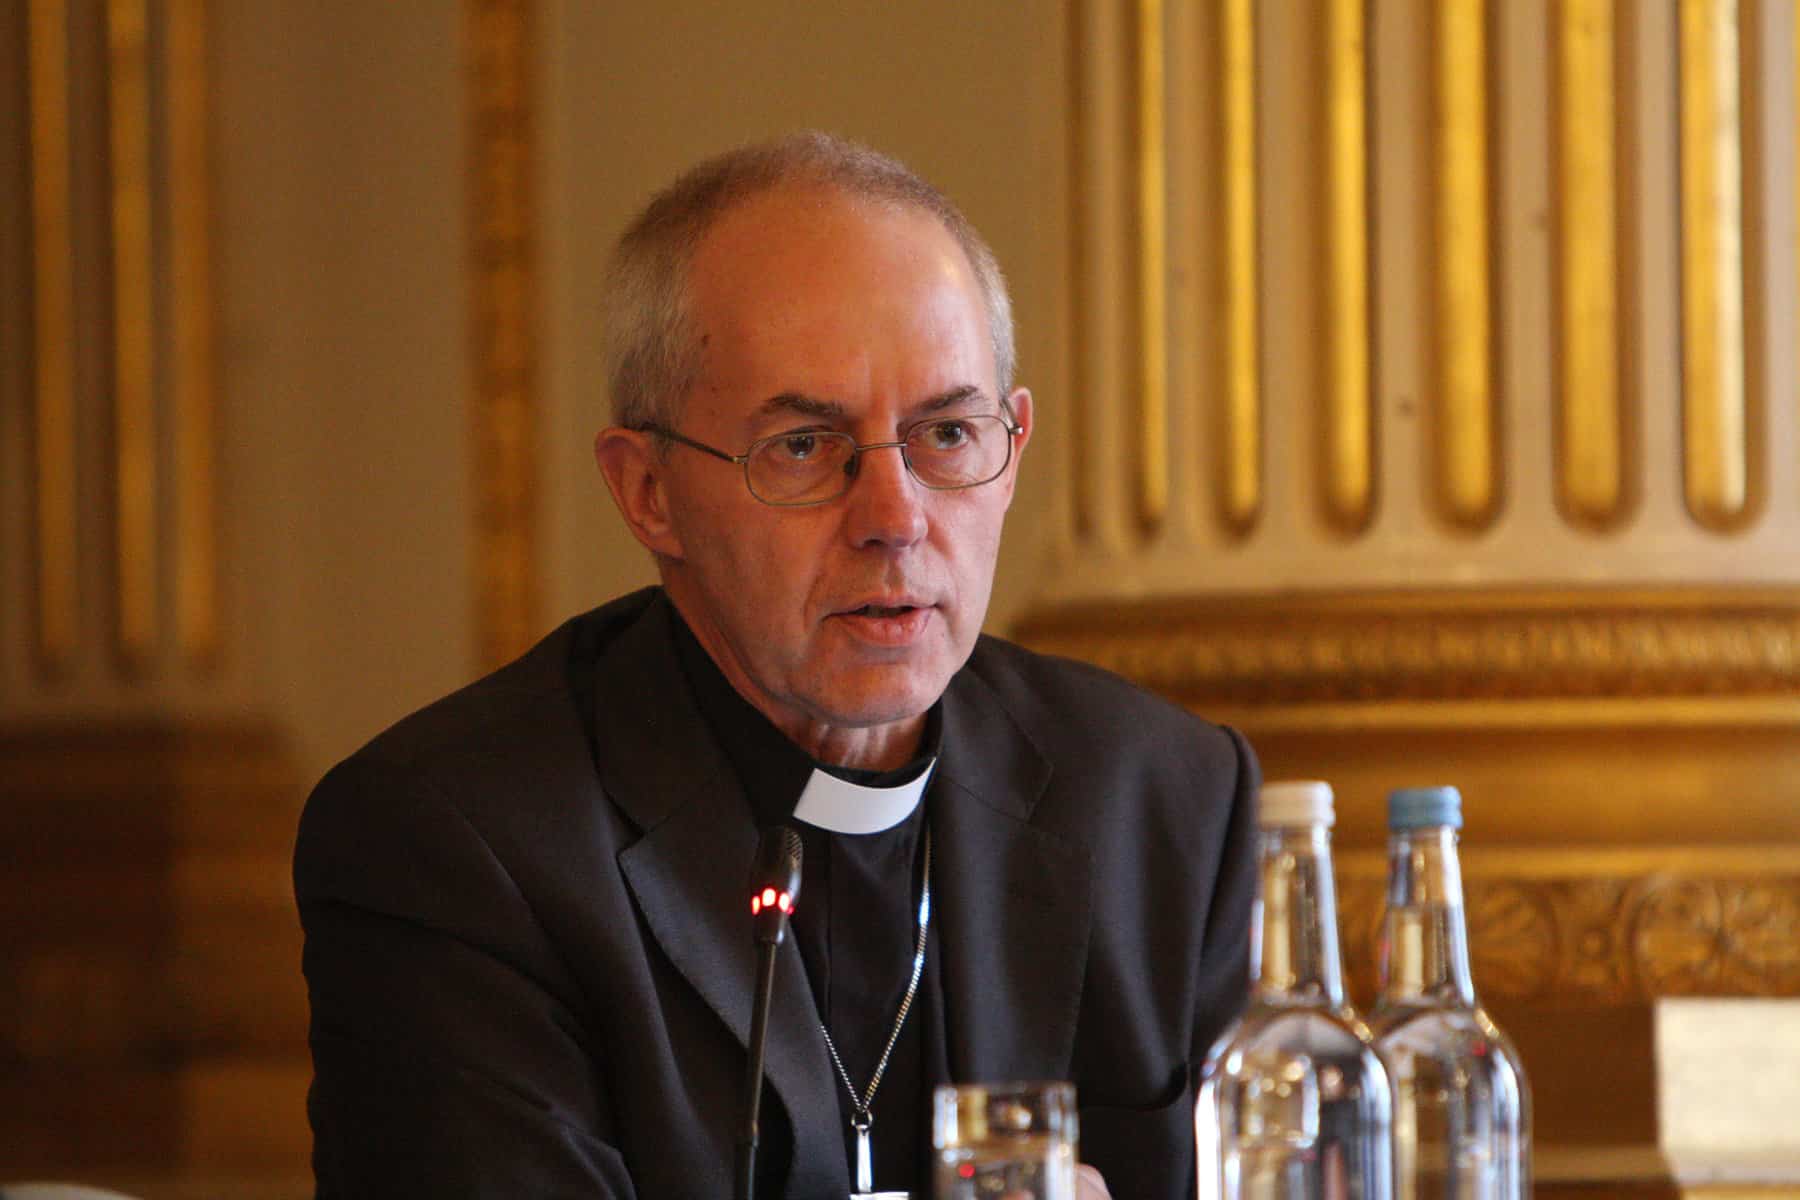 Justin Welby is shown seated at a table and speaking.